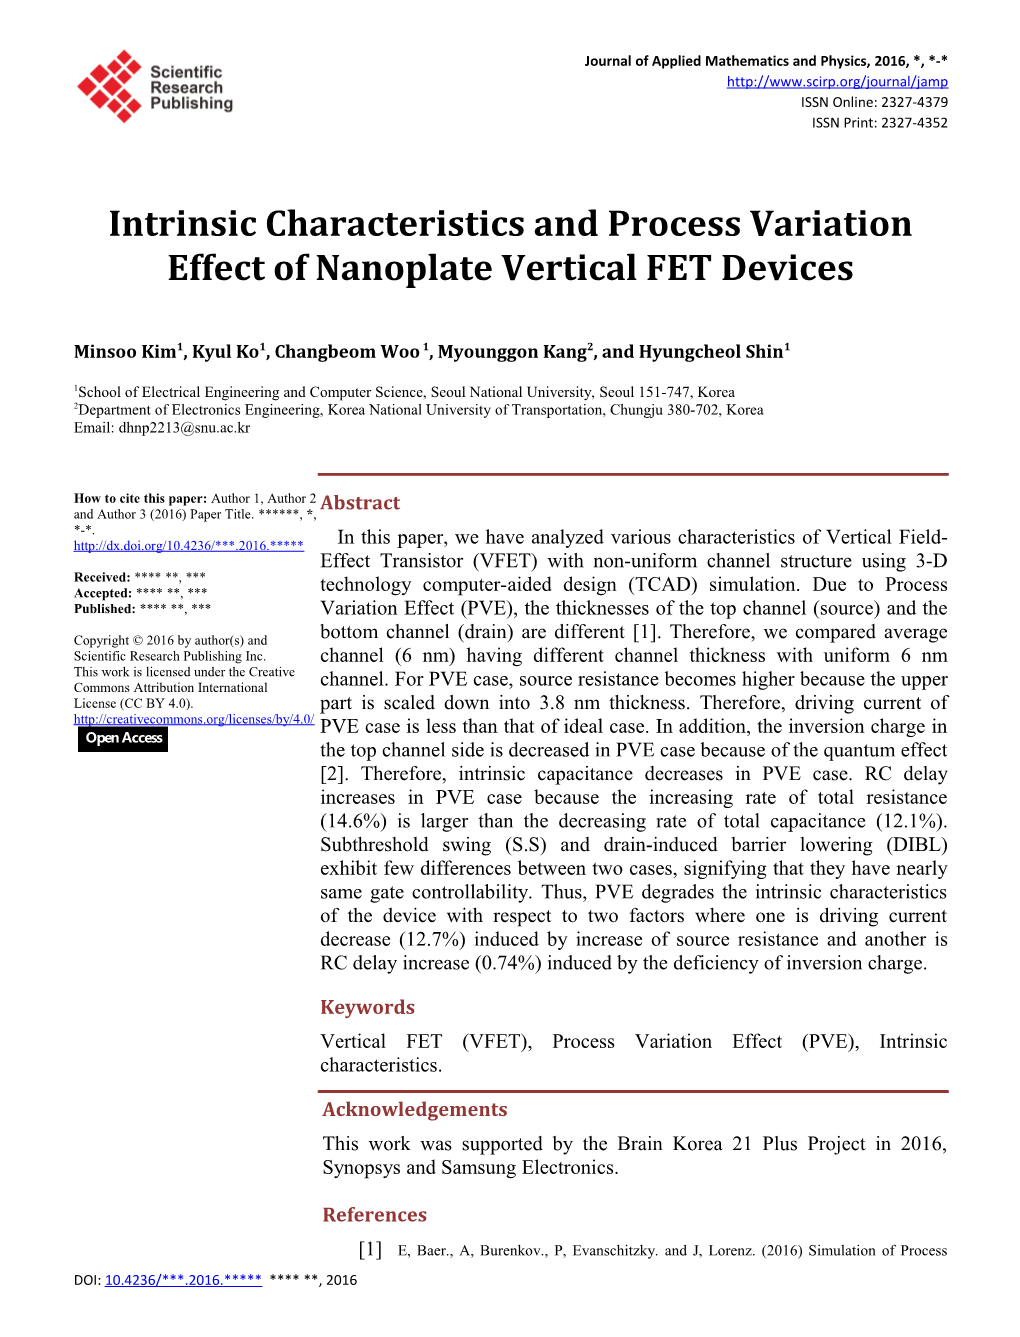 Intrinsic Characteristics and Process Variation Effect of Nanoplate Vertical FET Devices